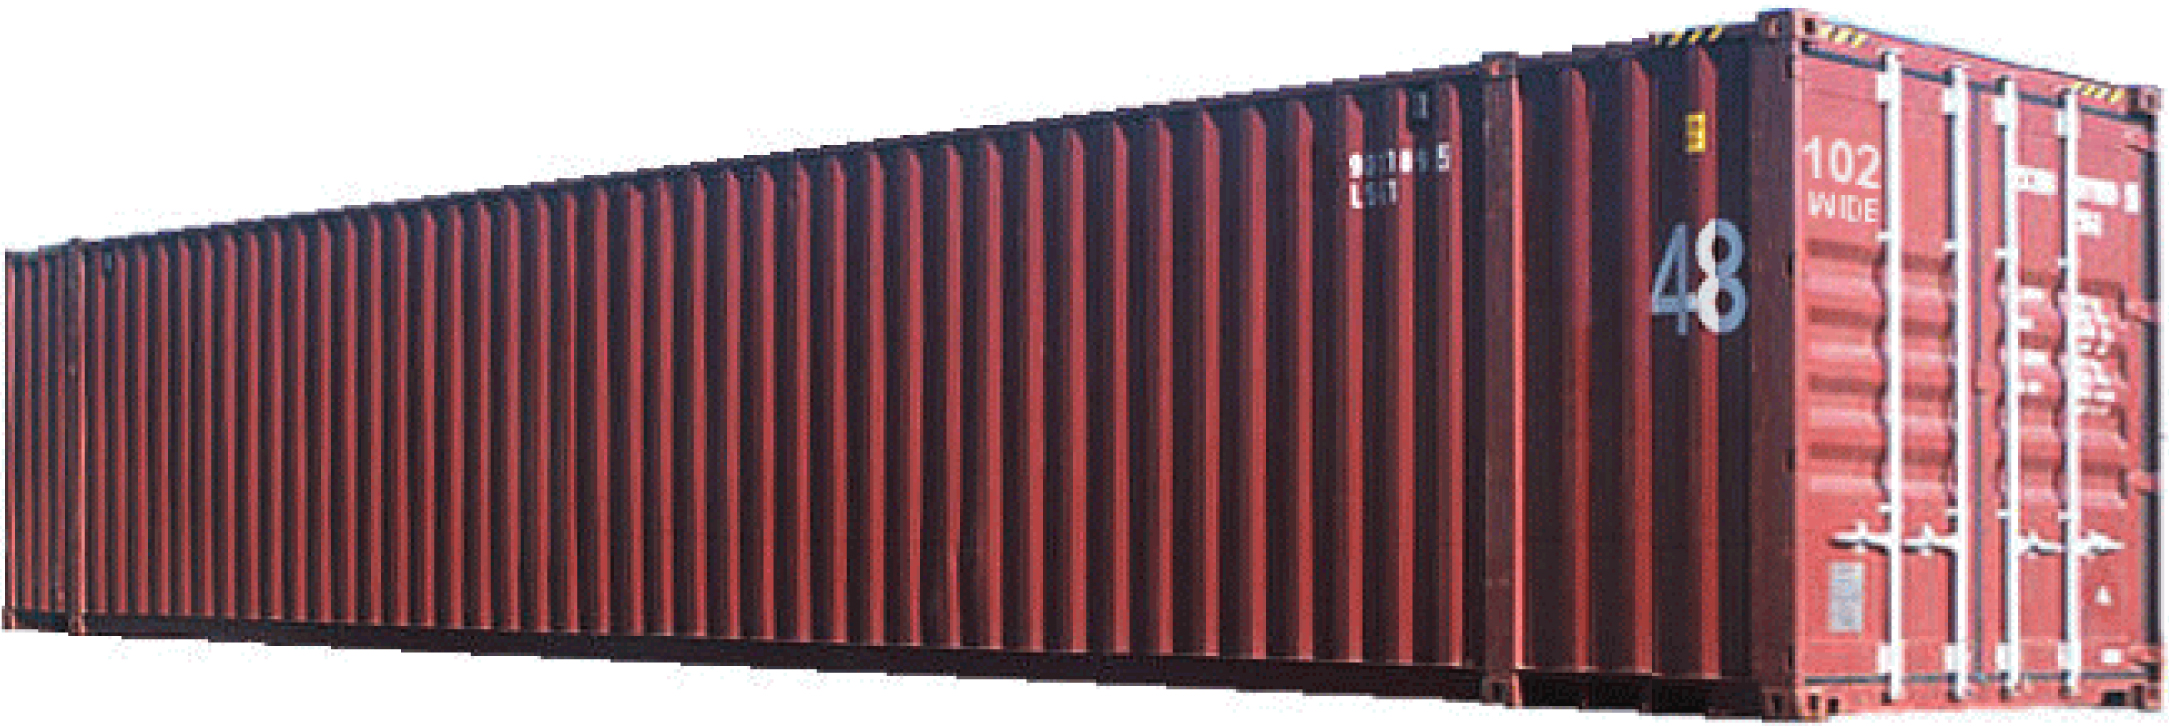 48’ x 9’6” x 102” Dry Freight Container